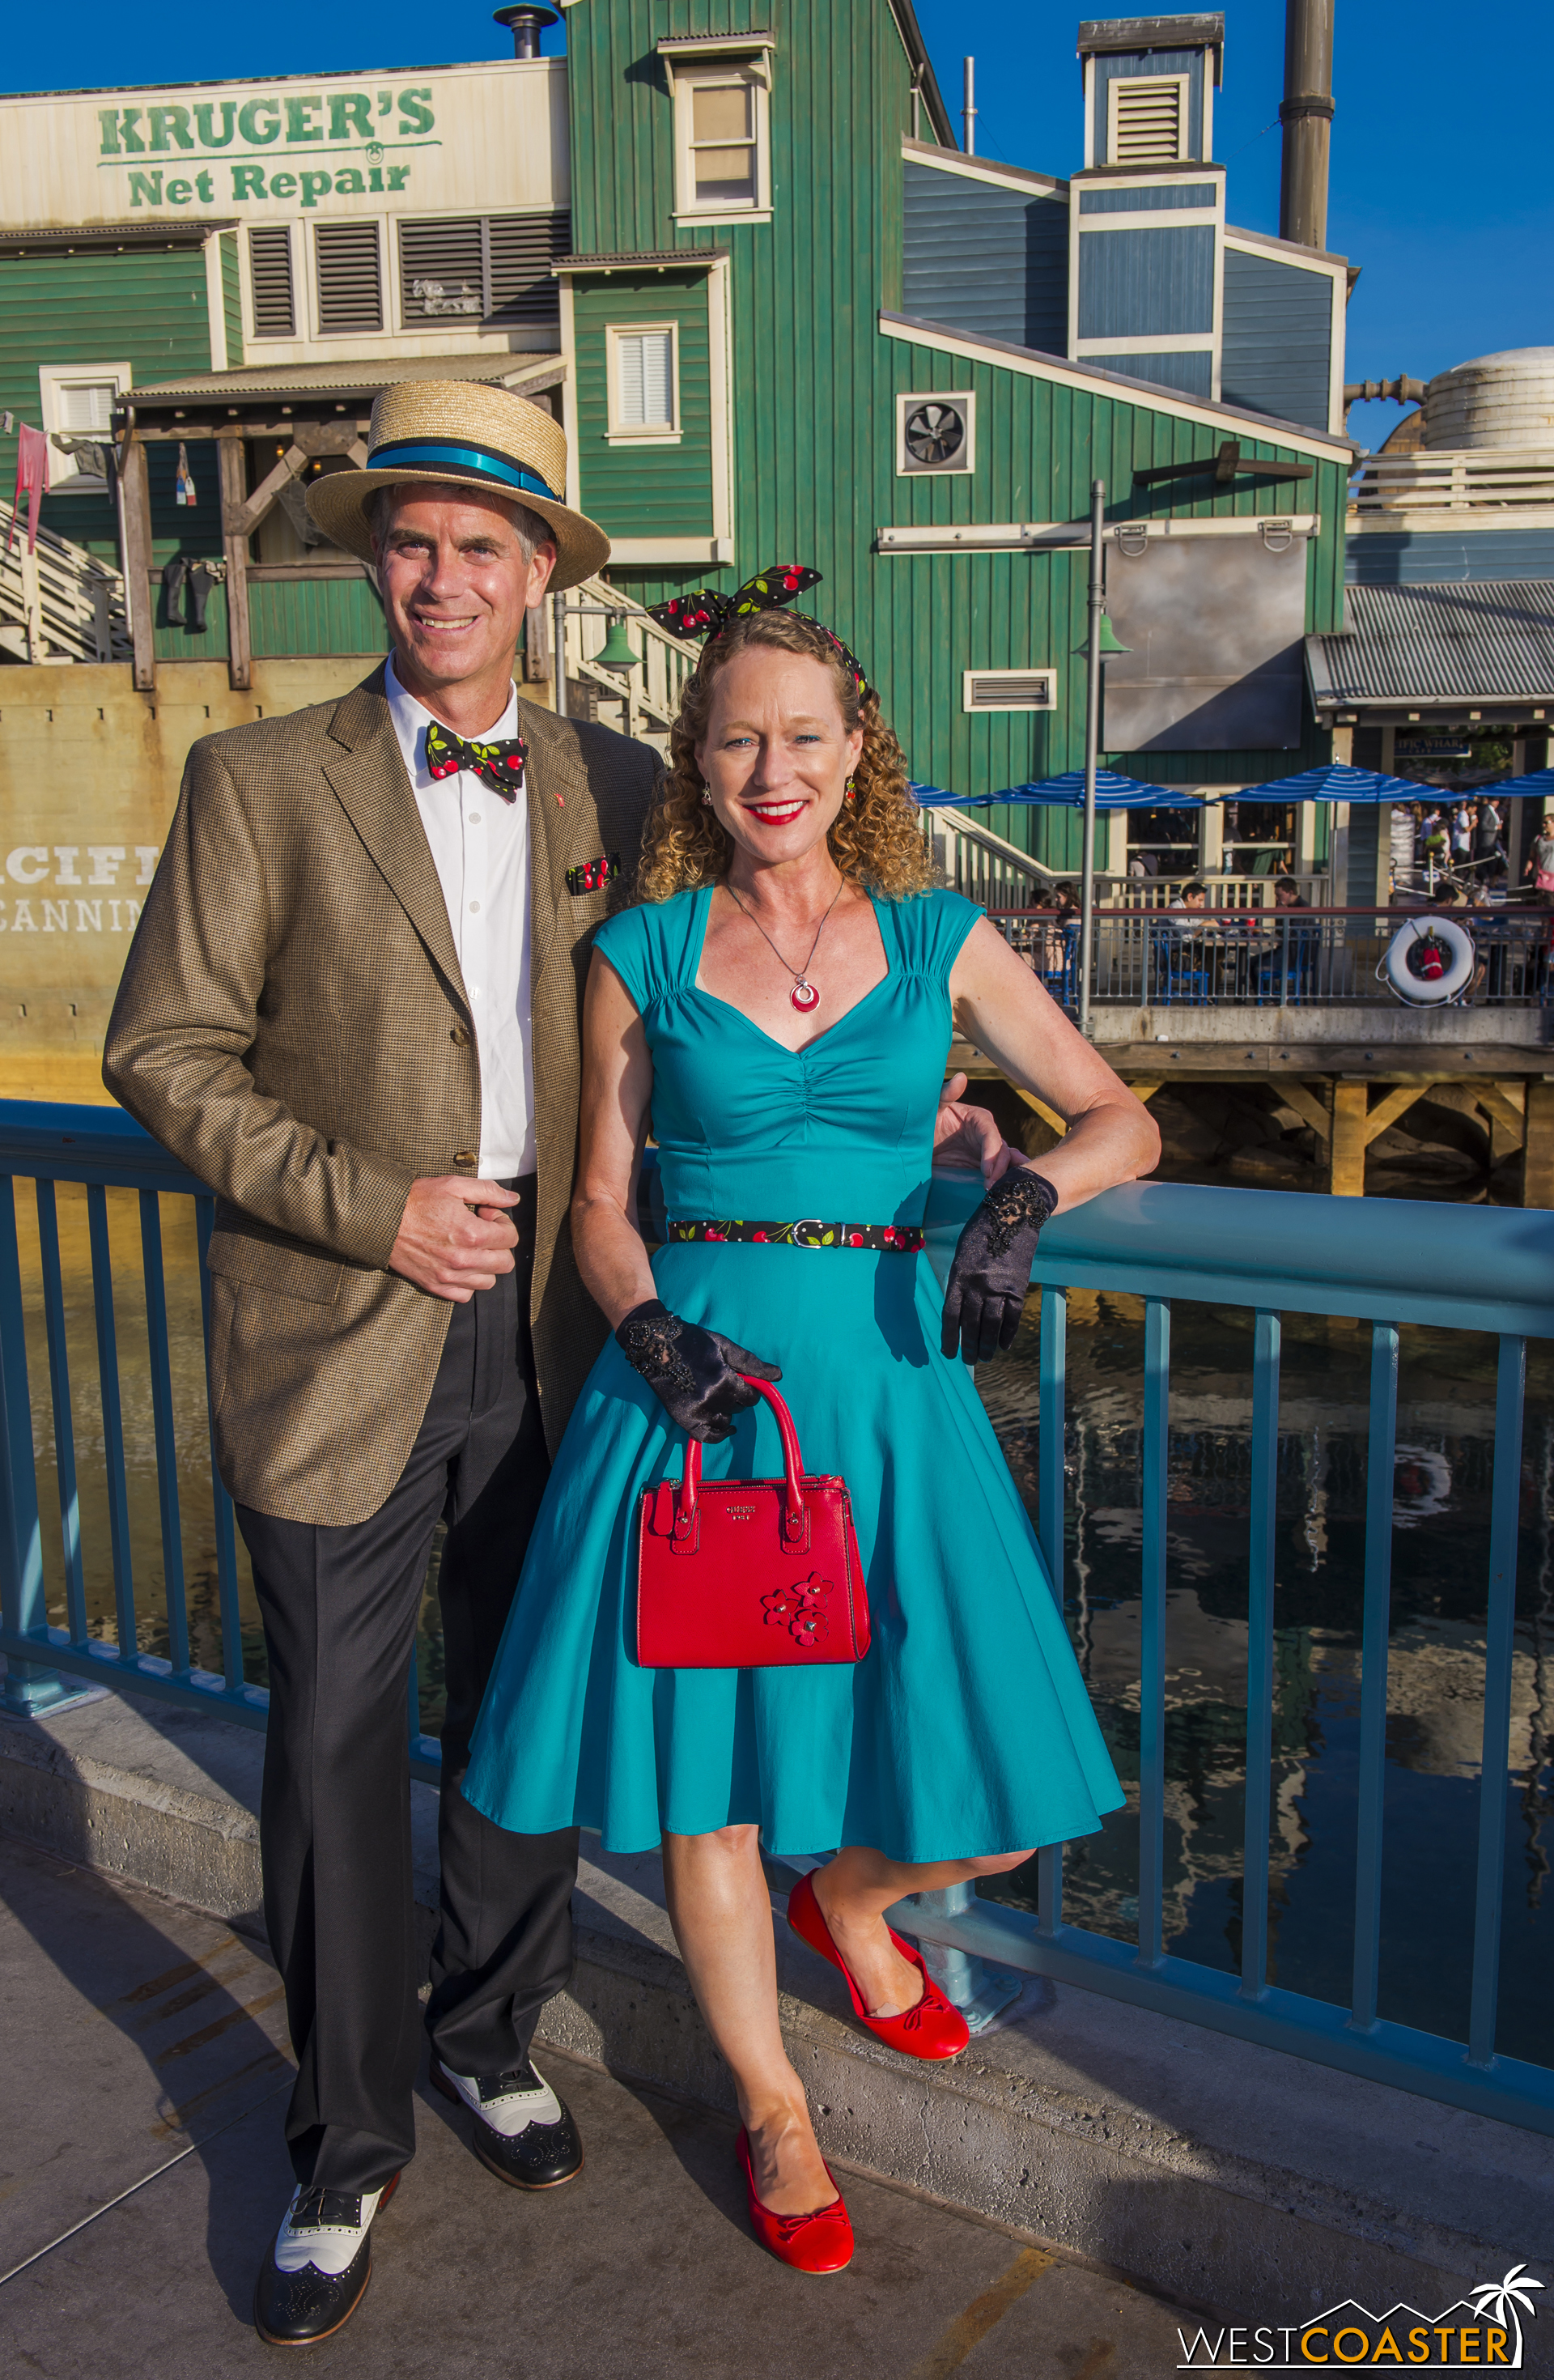  Another familiar face, Todd Young (  @Disneyland67   on Instagram), a fantastic photographer who owns multiple actual vintage cameras and is consistently on point with his Dapper Day style.&nbsp; And his wife too. 